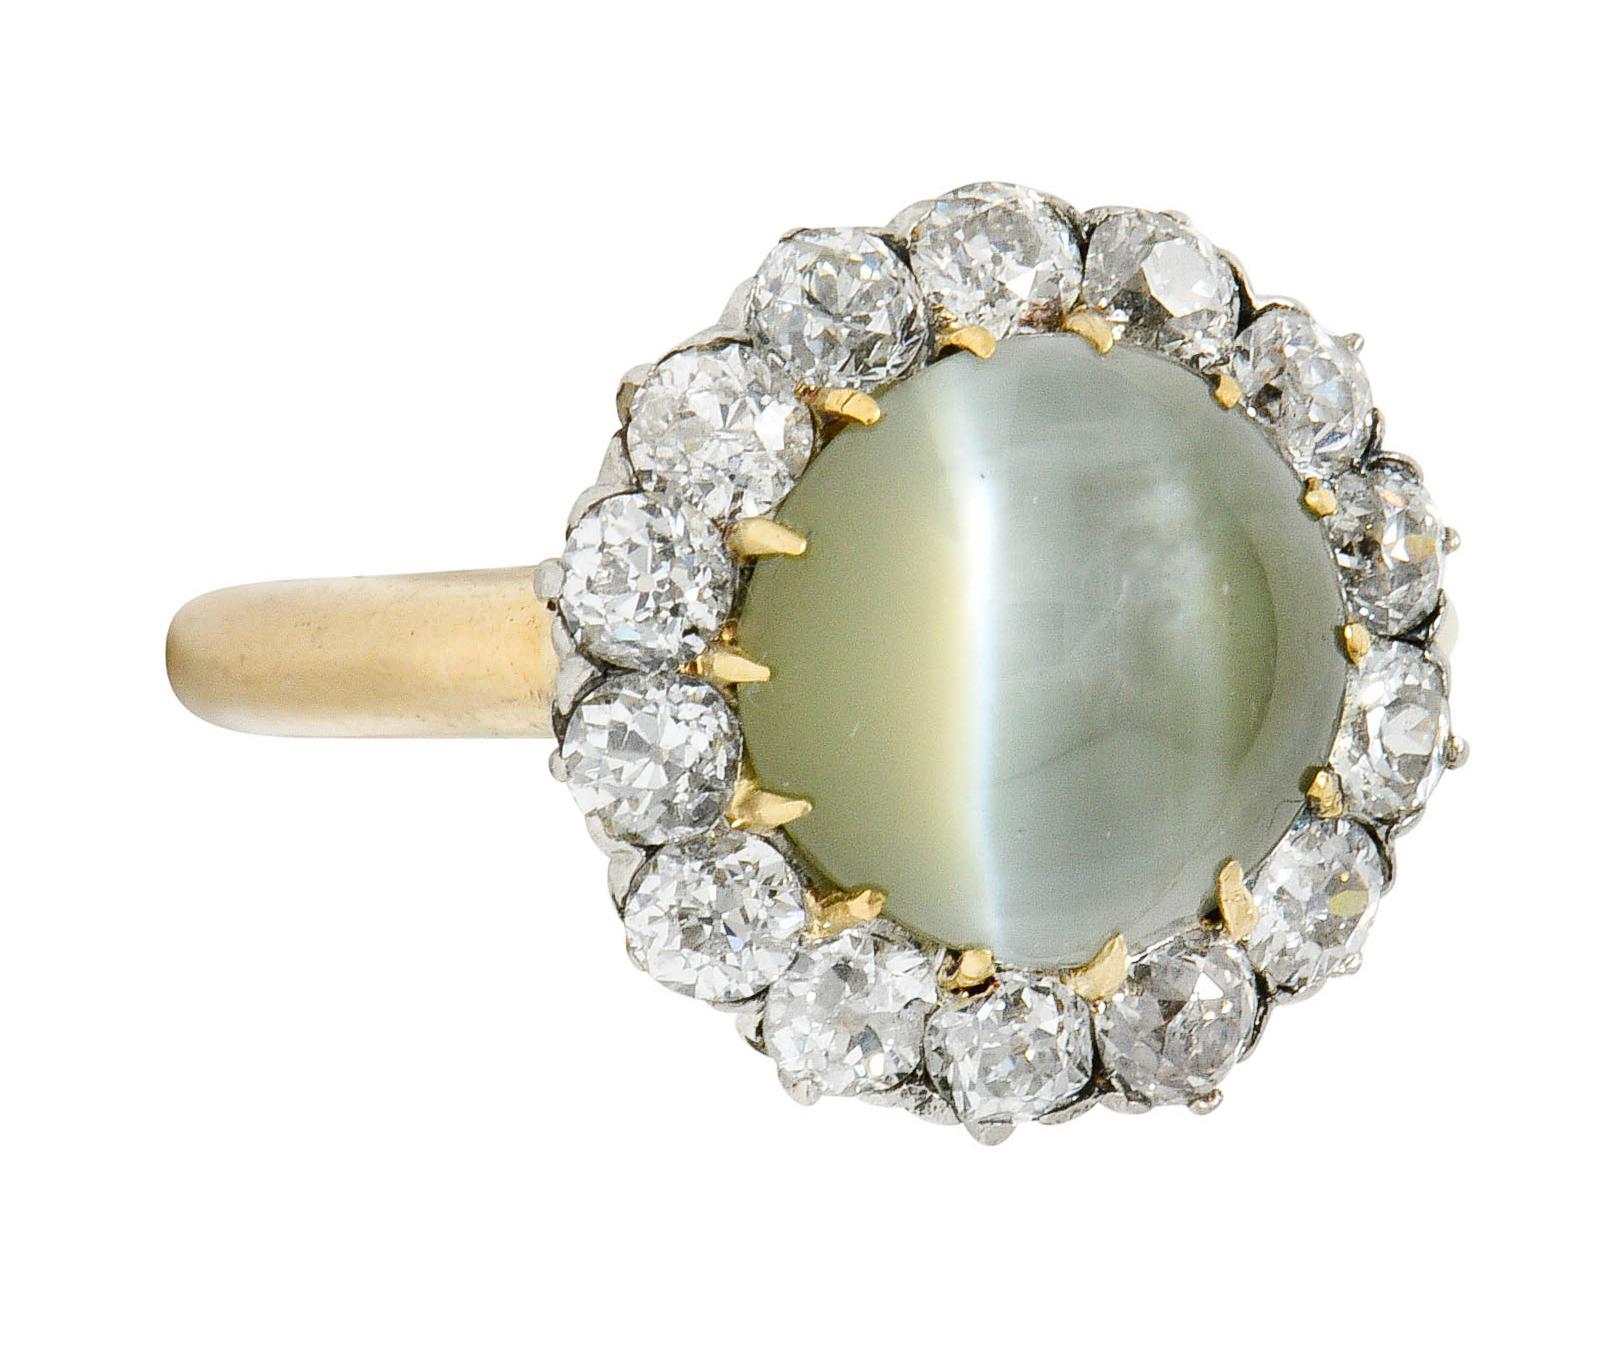 Centering a 9.3 mm round cat's eye chrysoberyl cabochon

Translucent slightly yellowish-green with a sharp white eye

Surrounded by old mine cut diamonds, set in platinum, weighing approximately 1.20 carats

Weighing approximately 1.20 carats with G